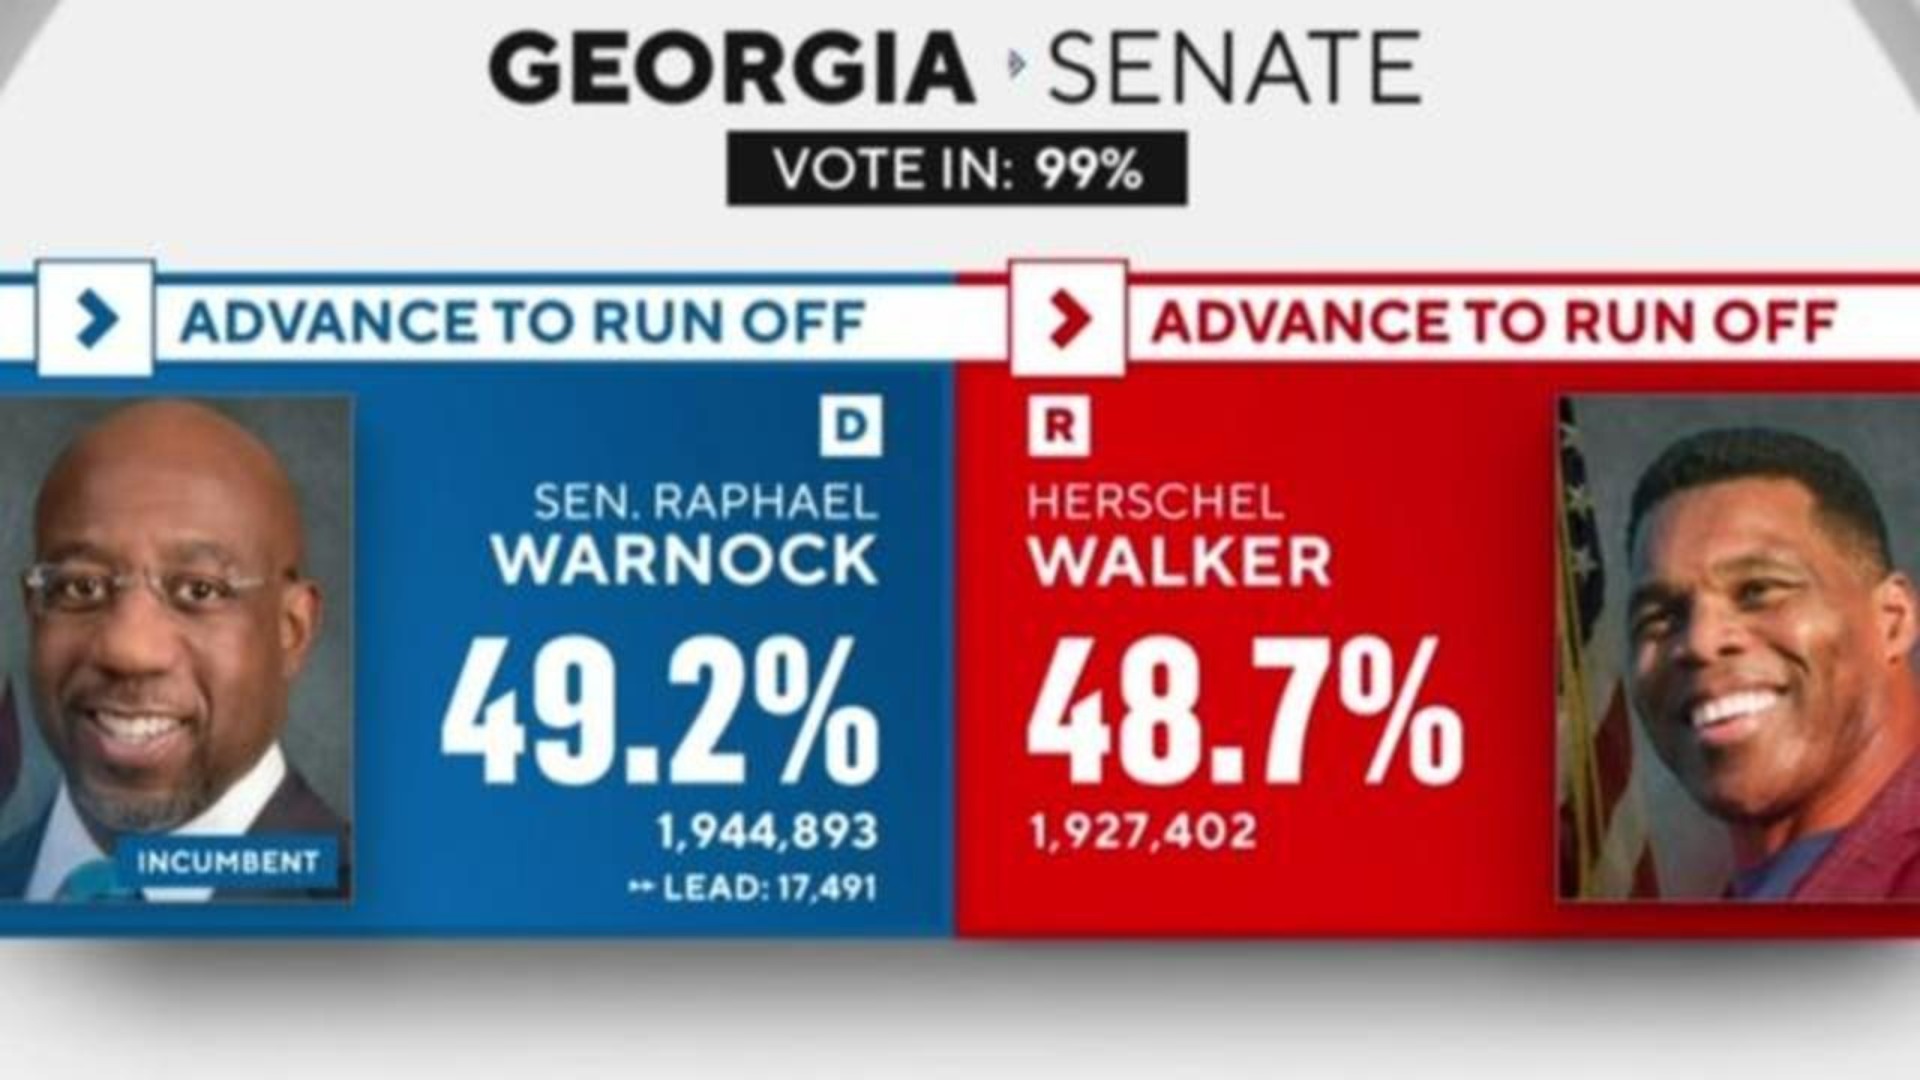 Incumbent Raphael Warnock (D) and Herschel Walker (R) advanced to a runoff election on December 6, 2022. Warnock, Walker, and Chase Oliver (L) ran to represent Georgia in the U.S. Senate.In Georgia, a general election advances to a runoff between the two top finishers if no candidate receives more than 50% of the vote. Since none of the candidates received this level of support on November 8 in the general election, a runoff is scheduled to take place on December 6. Warnock won his 2021 special runoff election by a margin of 2 percentage points.Who will win?